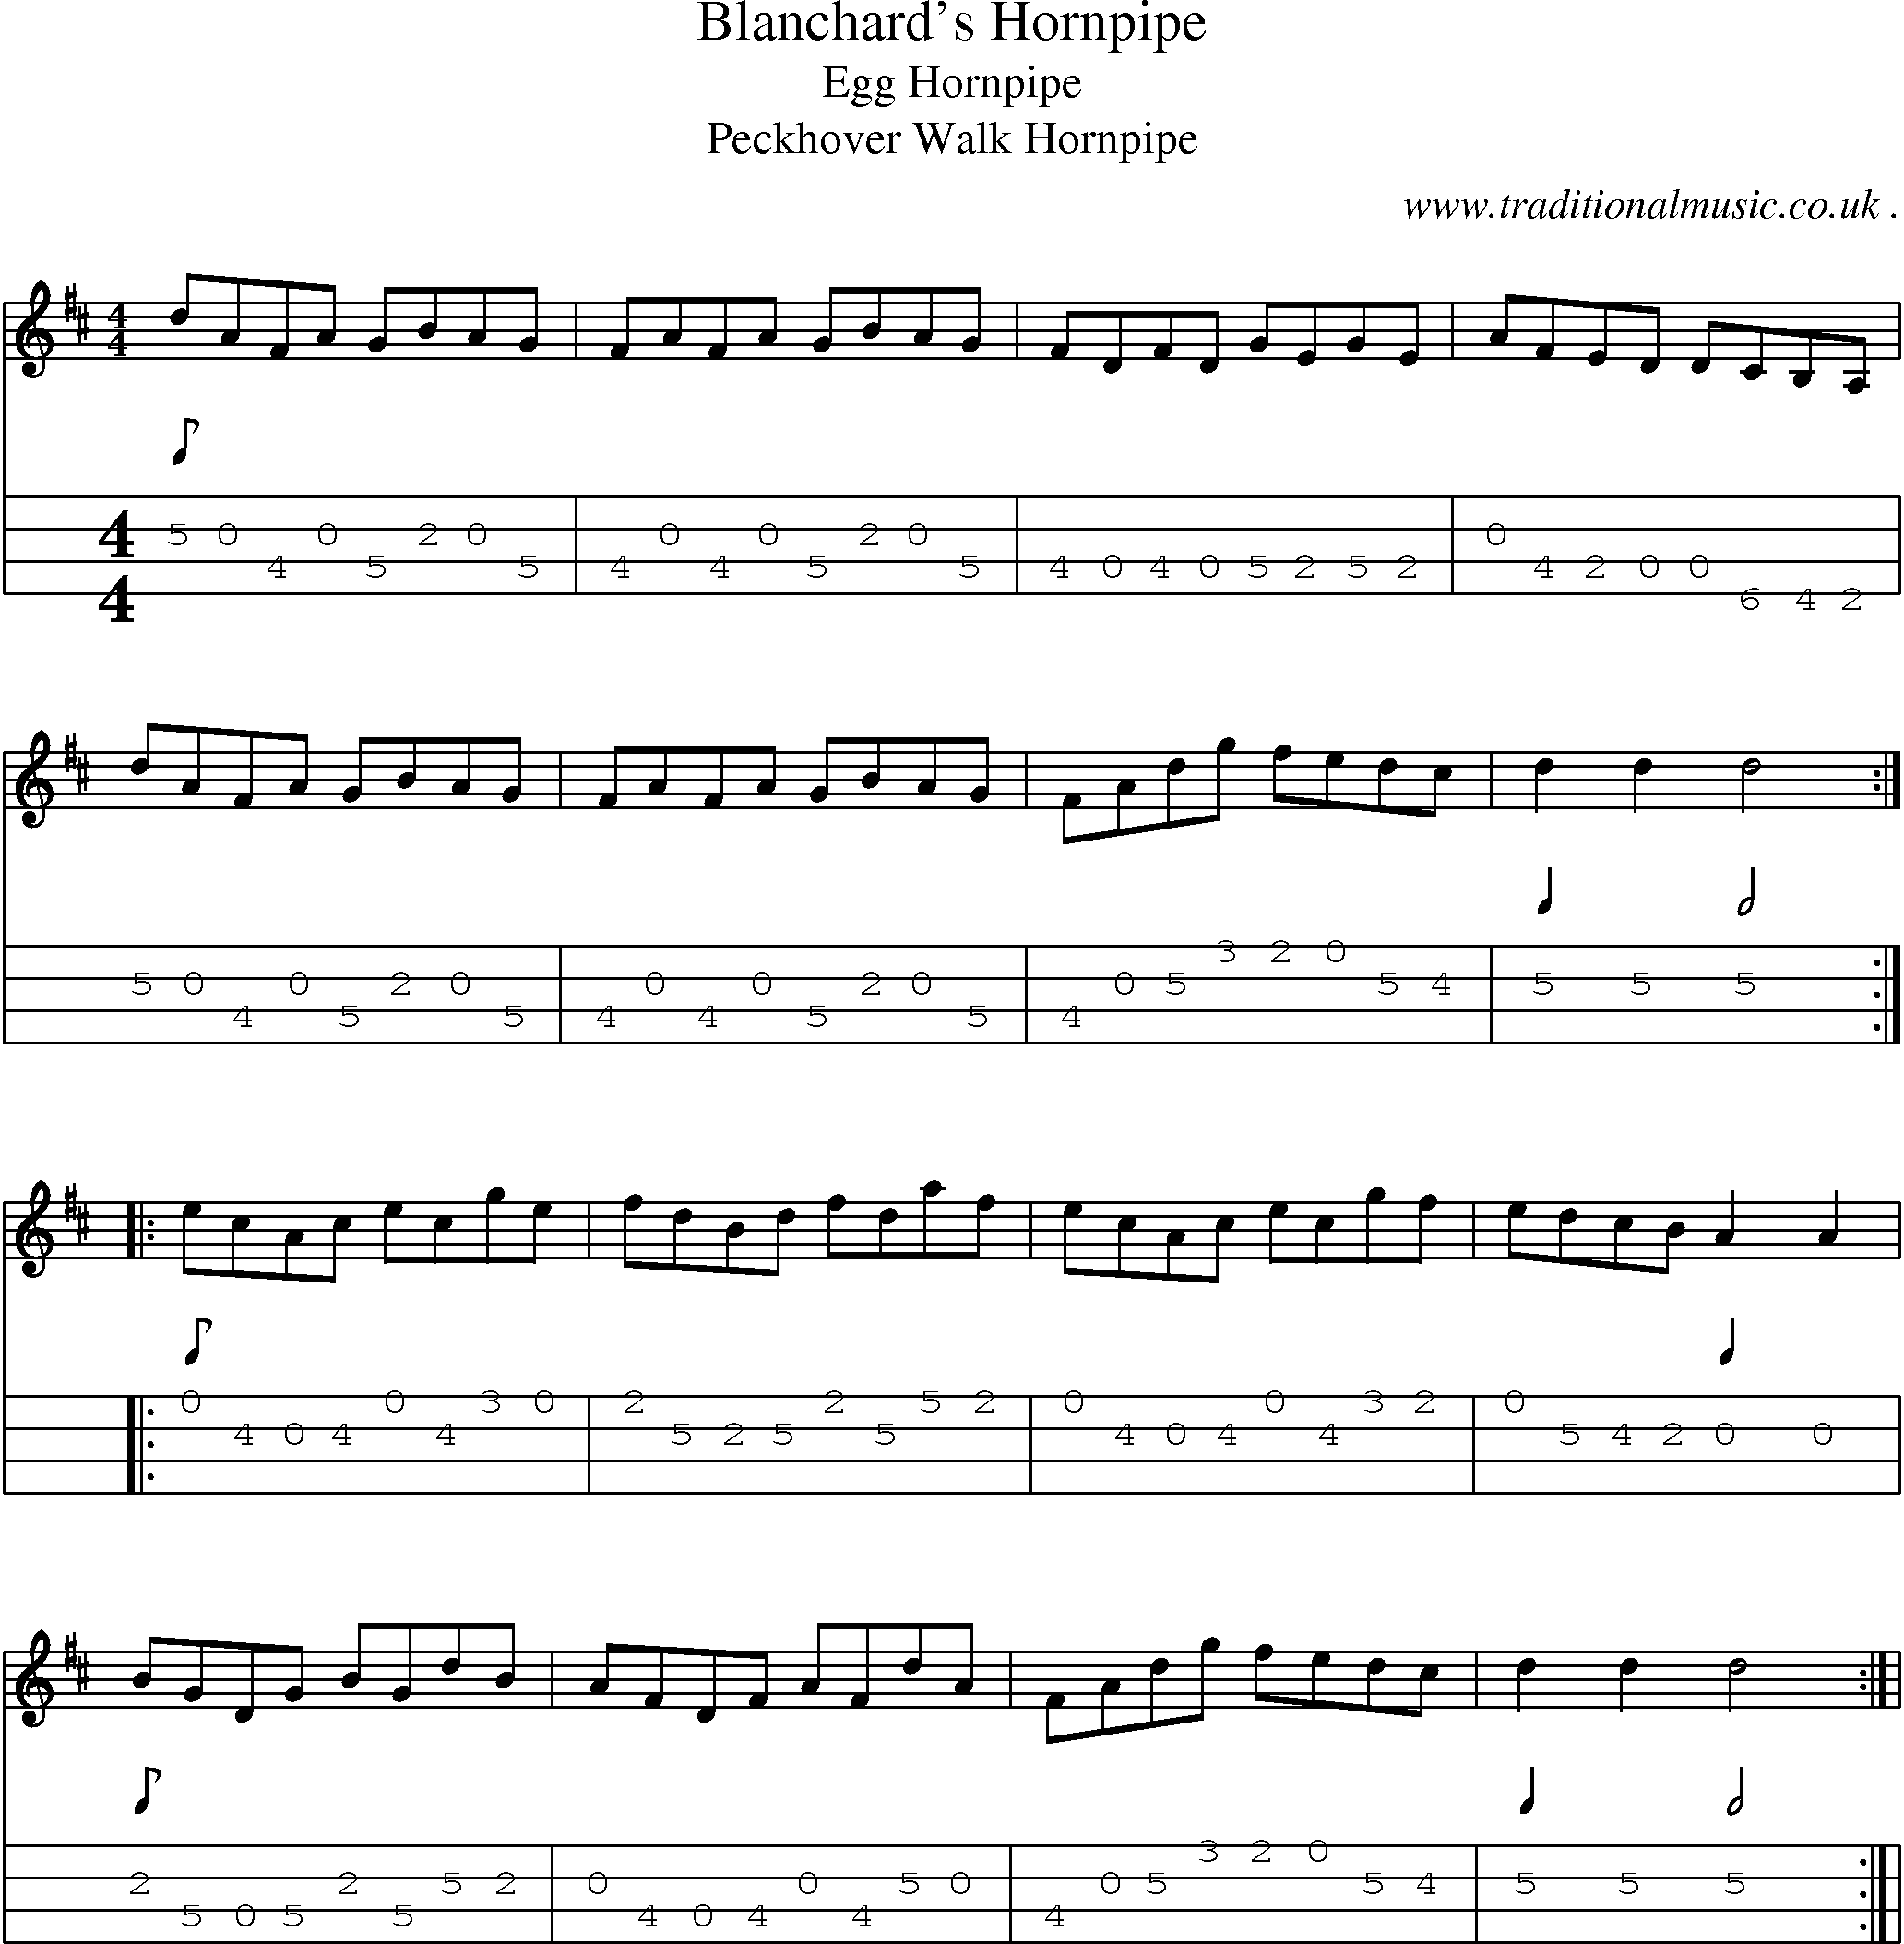 Sheet-Music and Mandolin Tabs for Blanchards Hornpipe